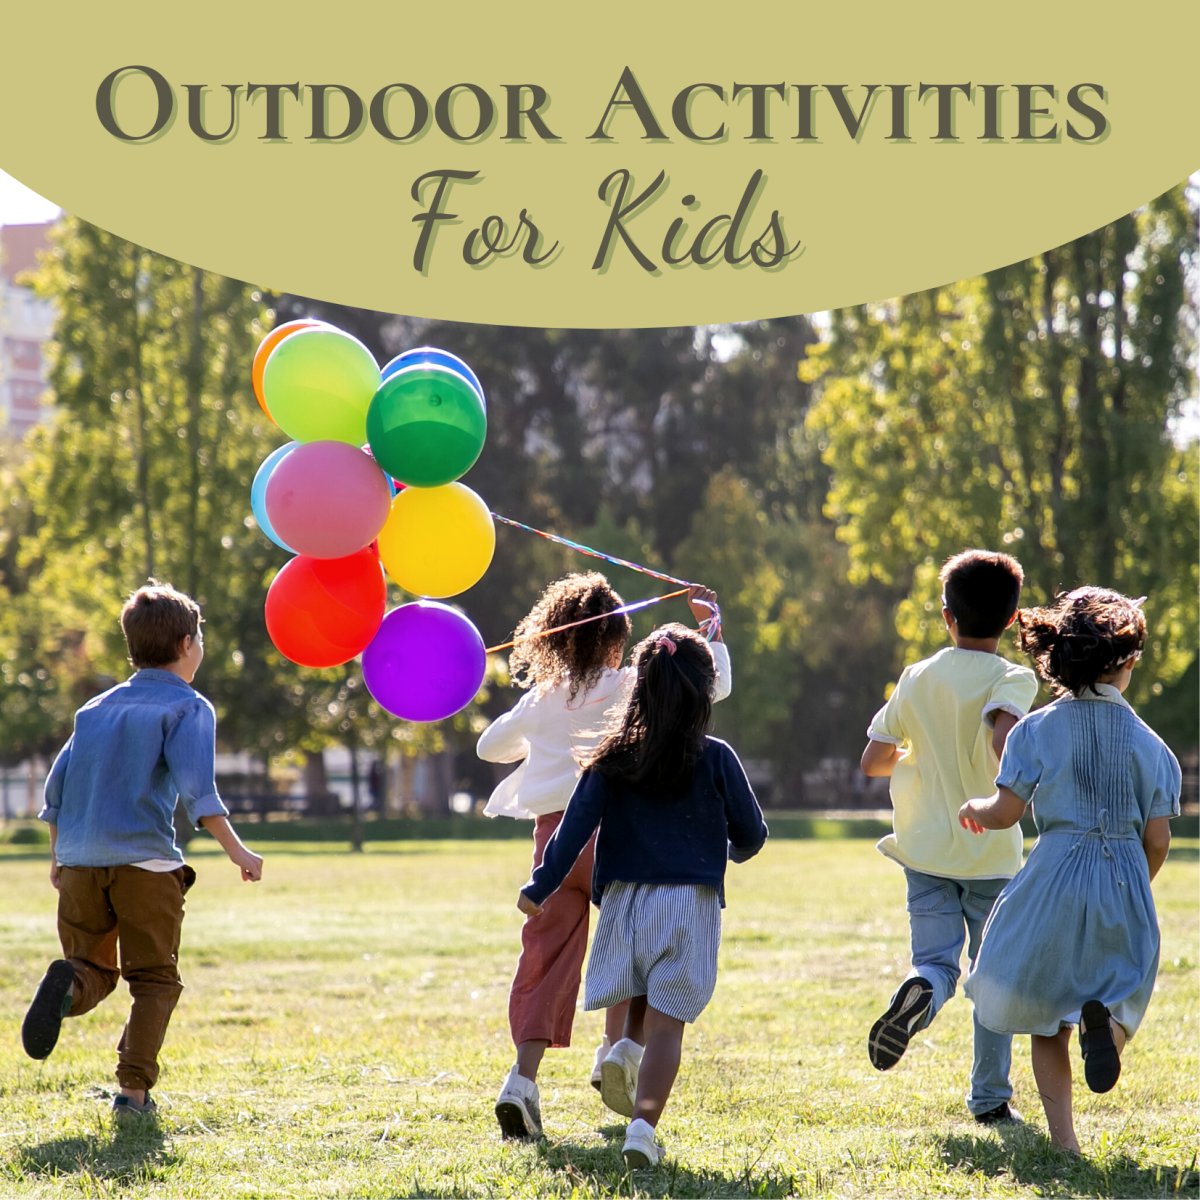 20+ engaging activities kids can do outside in the summer